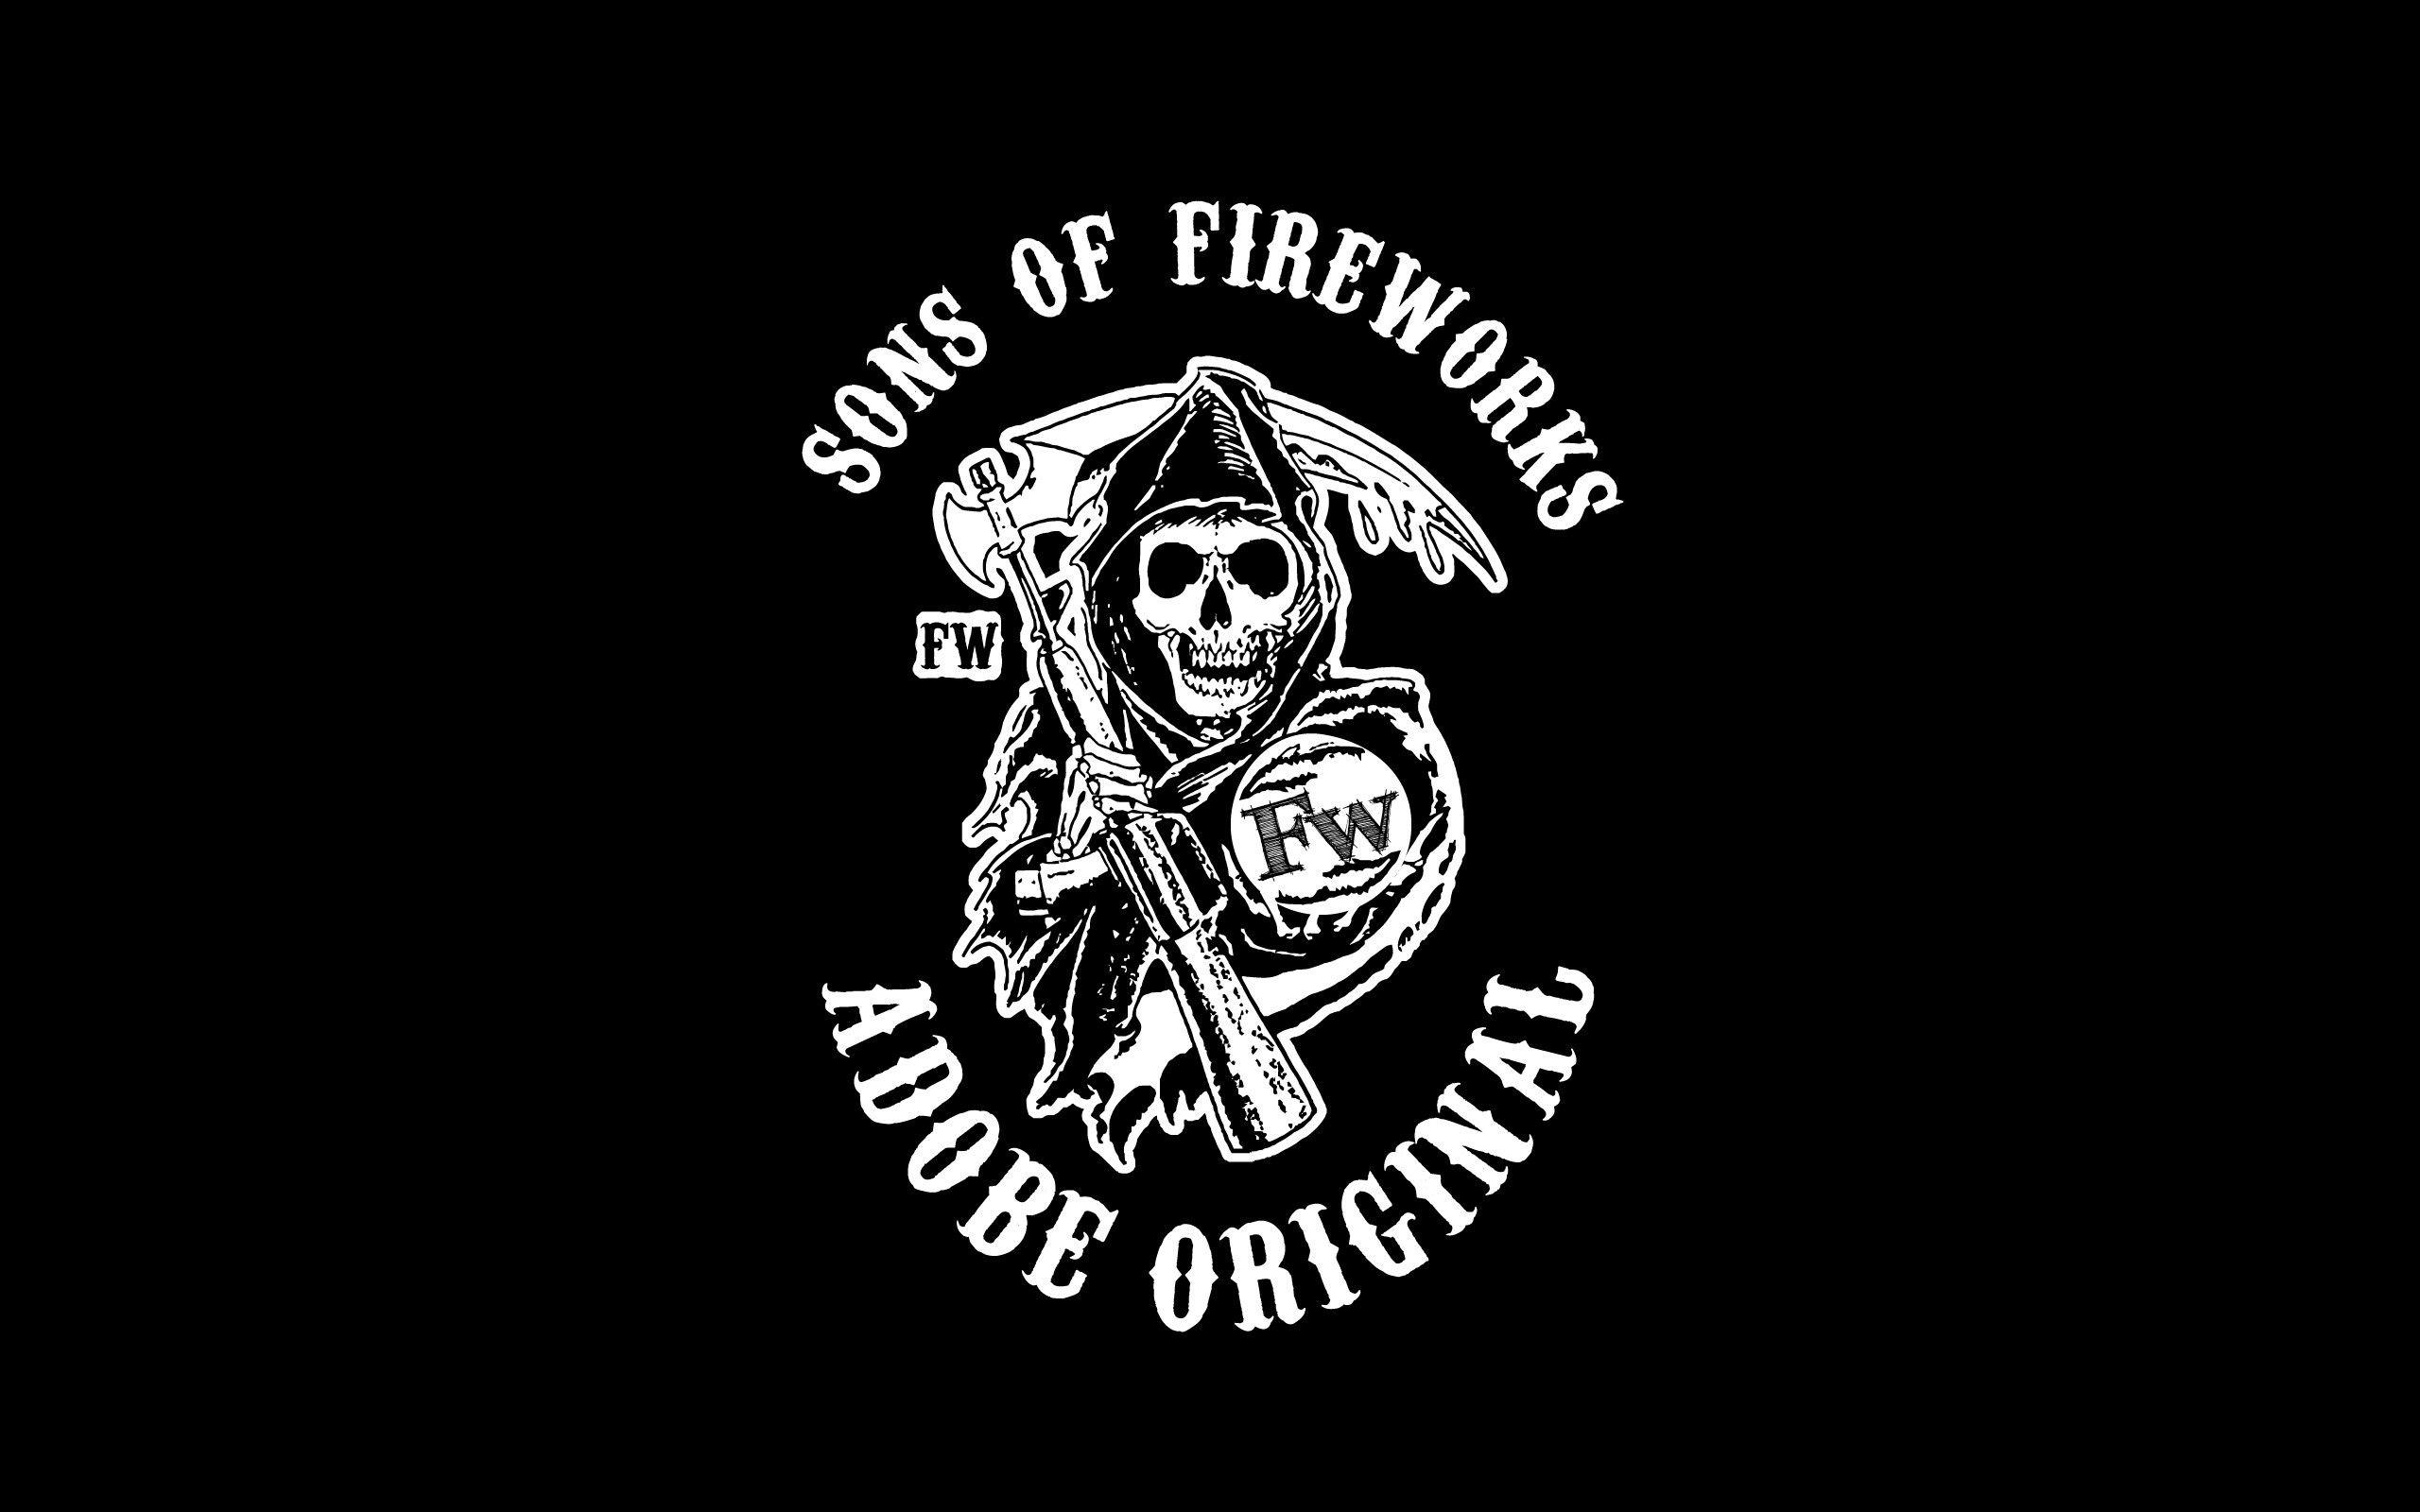 Sons of Anarchy Logo Wallpapers - Top Free Sons of Anarchy Logo